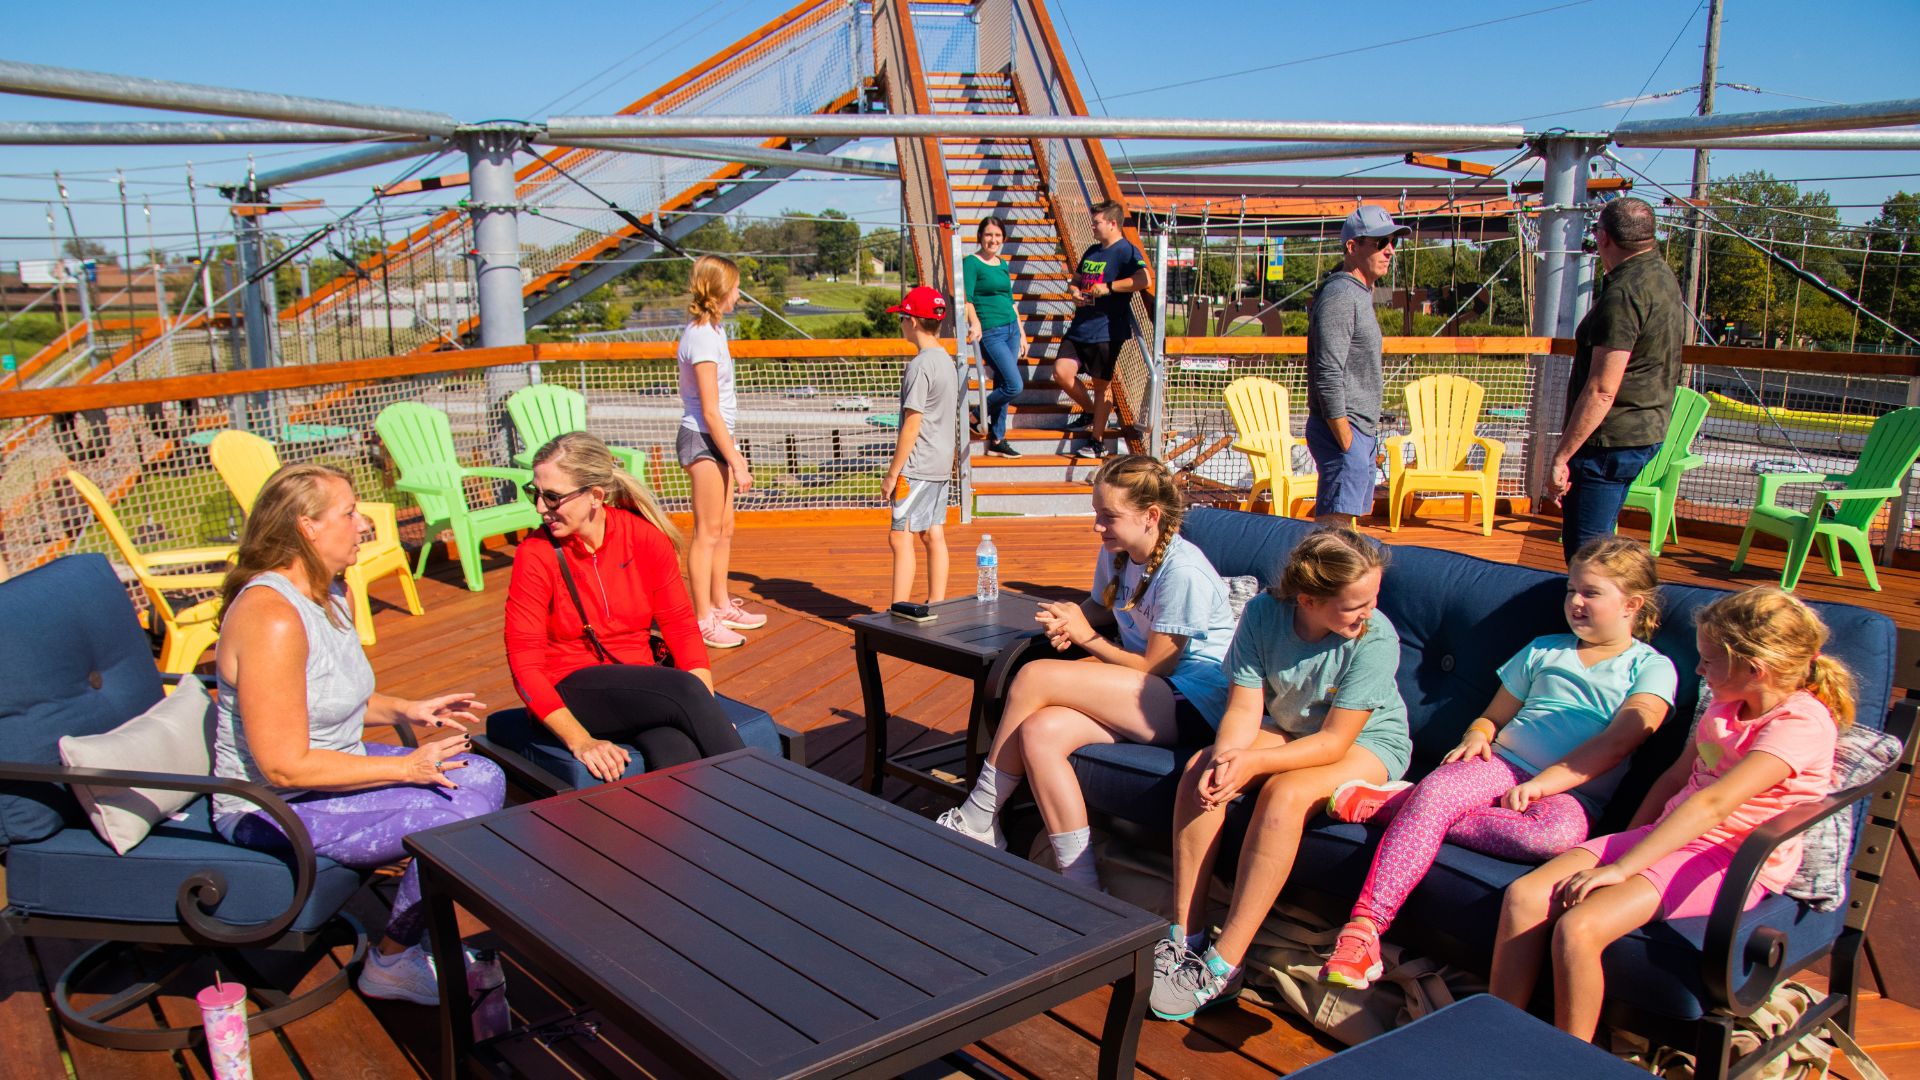 On top of the four-story adventure tower at RYZE Adventure Park, people relax on the sun deck.